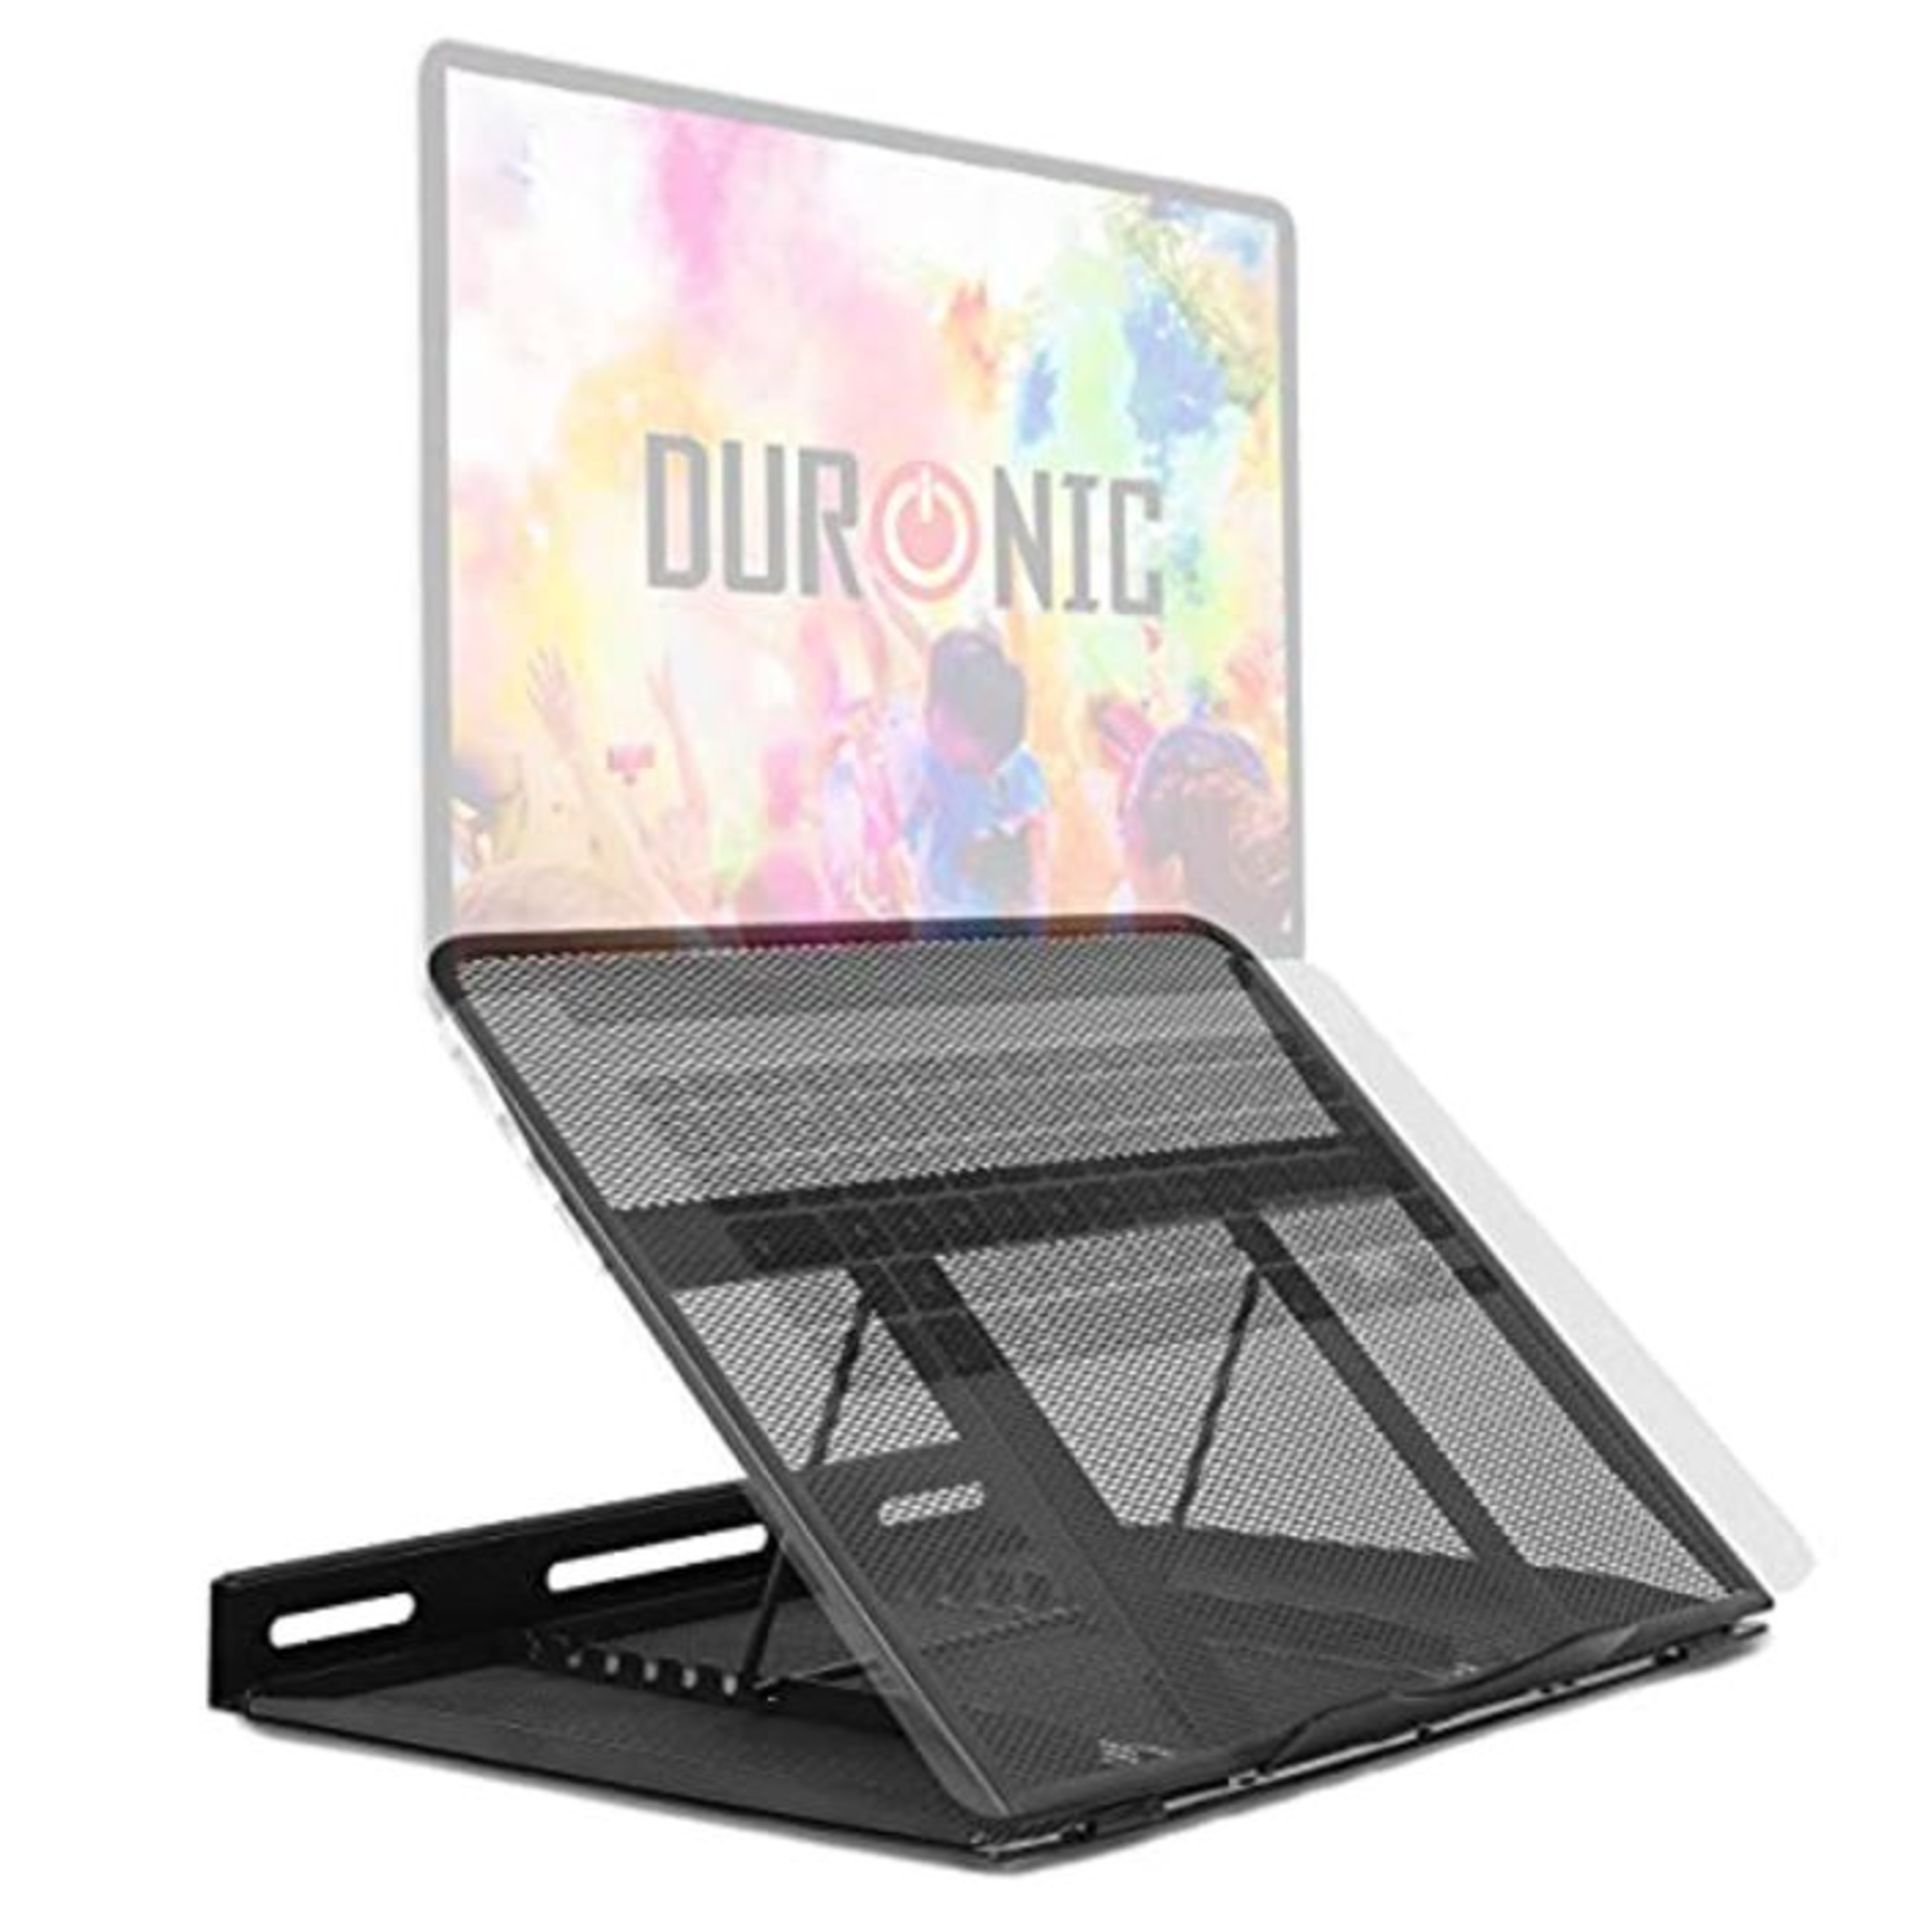 Duronic Monitor Laptop Stand DM074 | Multi-Use Desk Riser | Adjustable to 9x Height Po